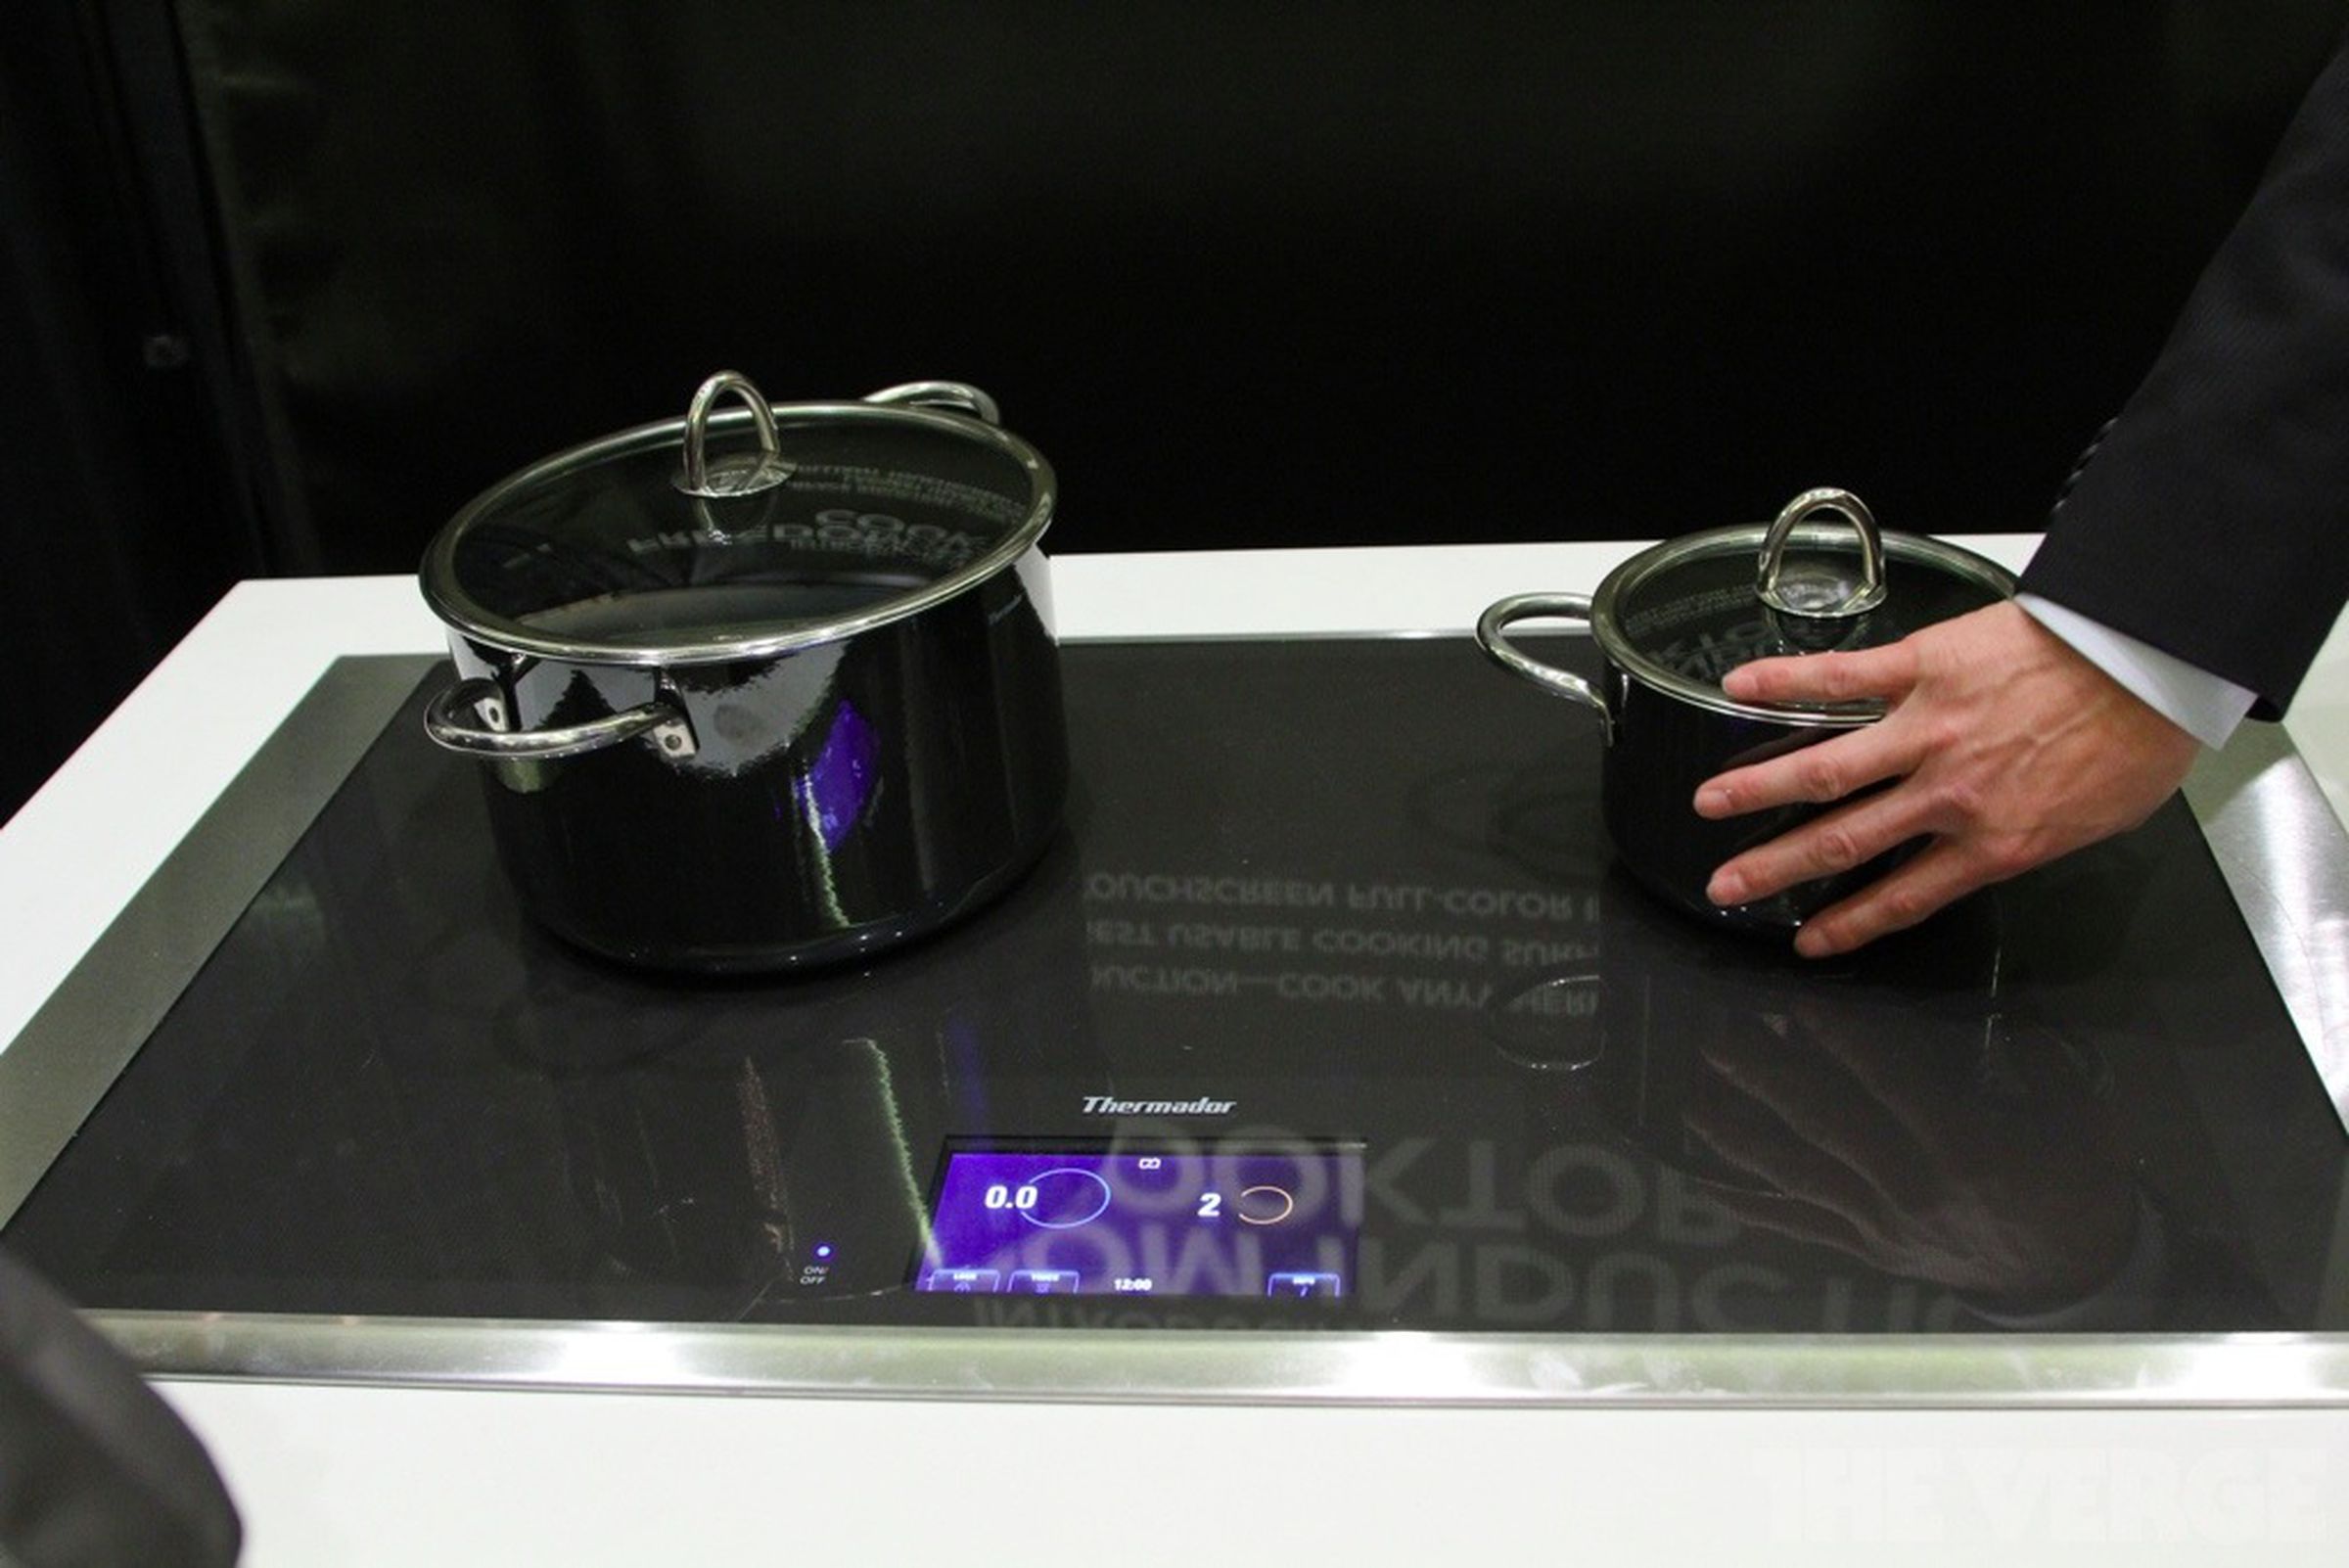 Thermador Freedom auto-sensing induction cooktop hands-on pictures